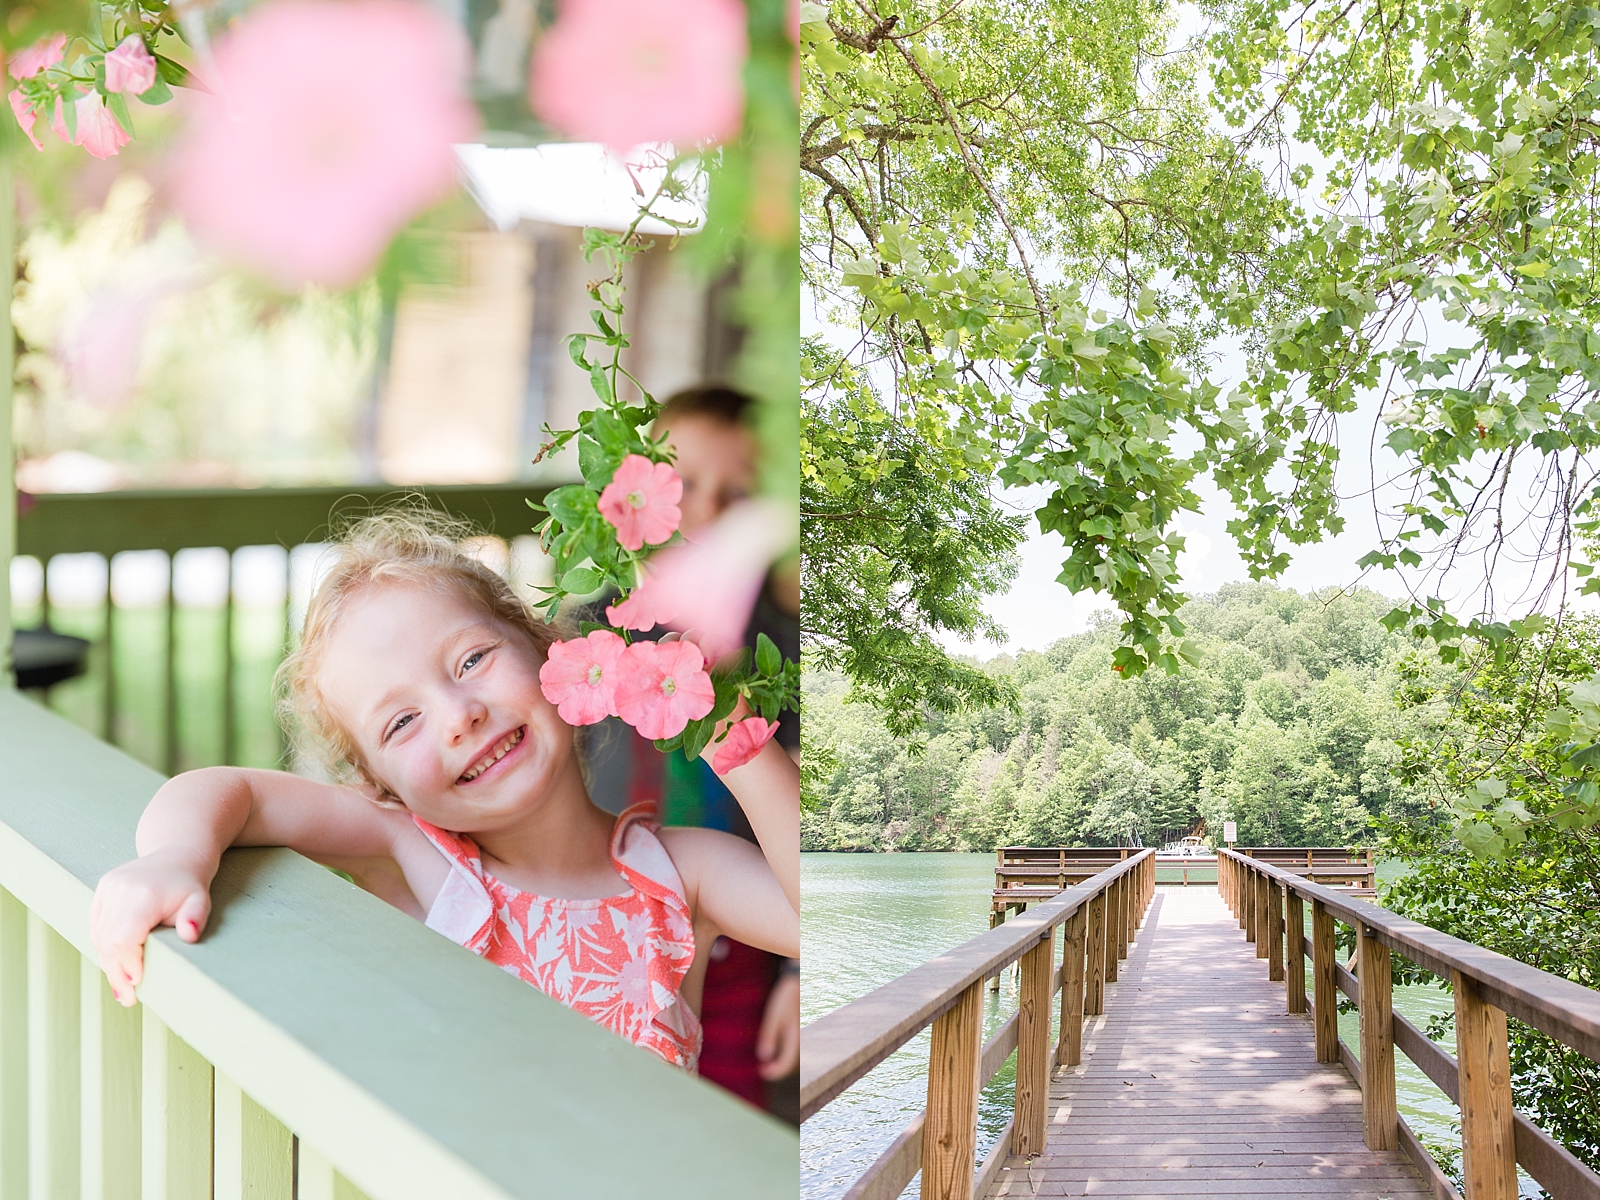 Nantahala Lake Little girl smiling with pink flowers and dock out the the lake photos